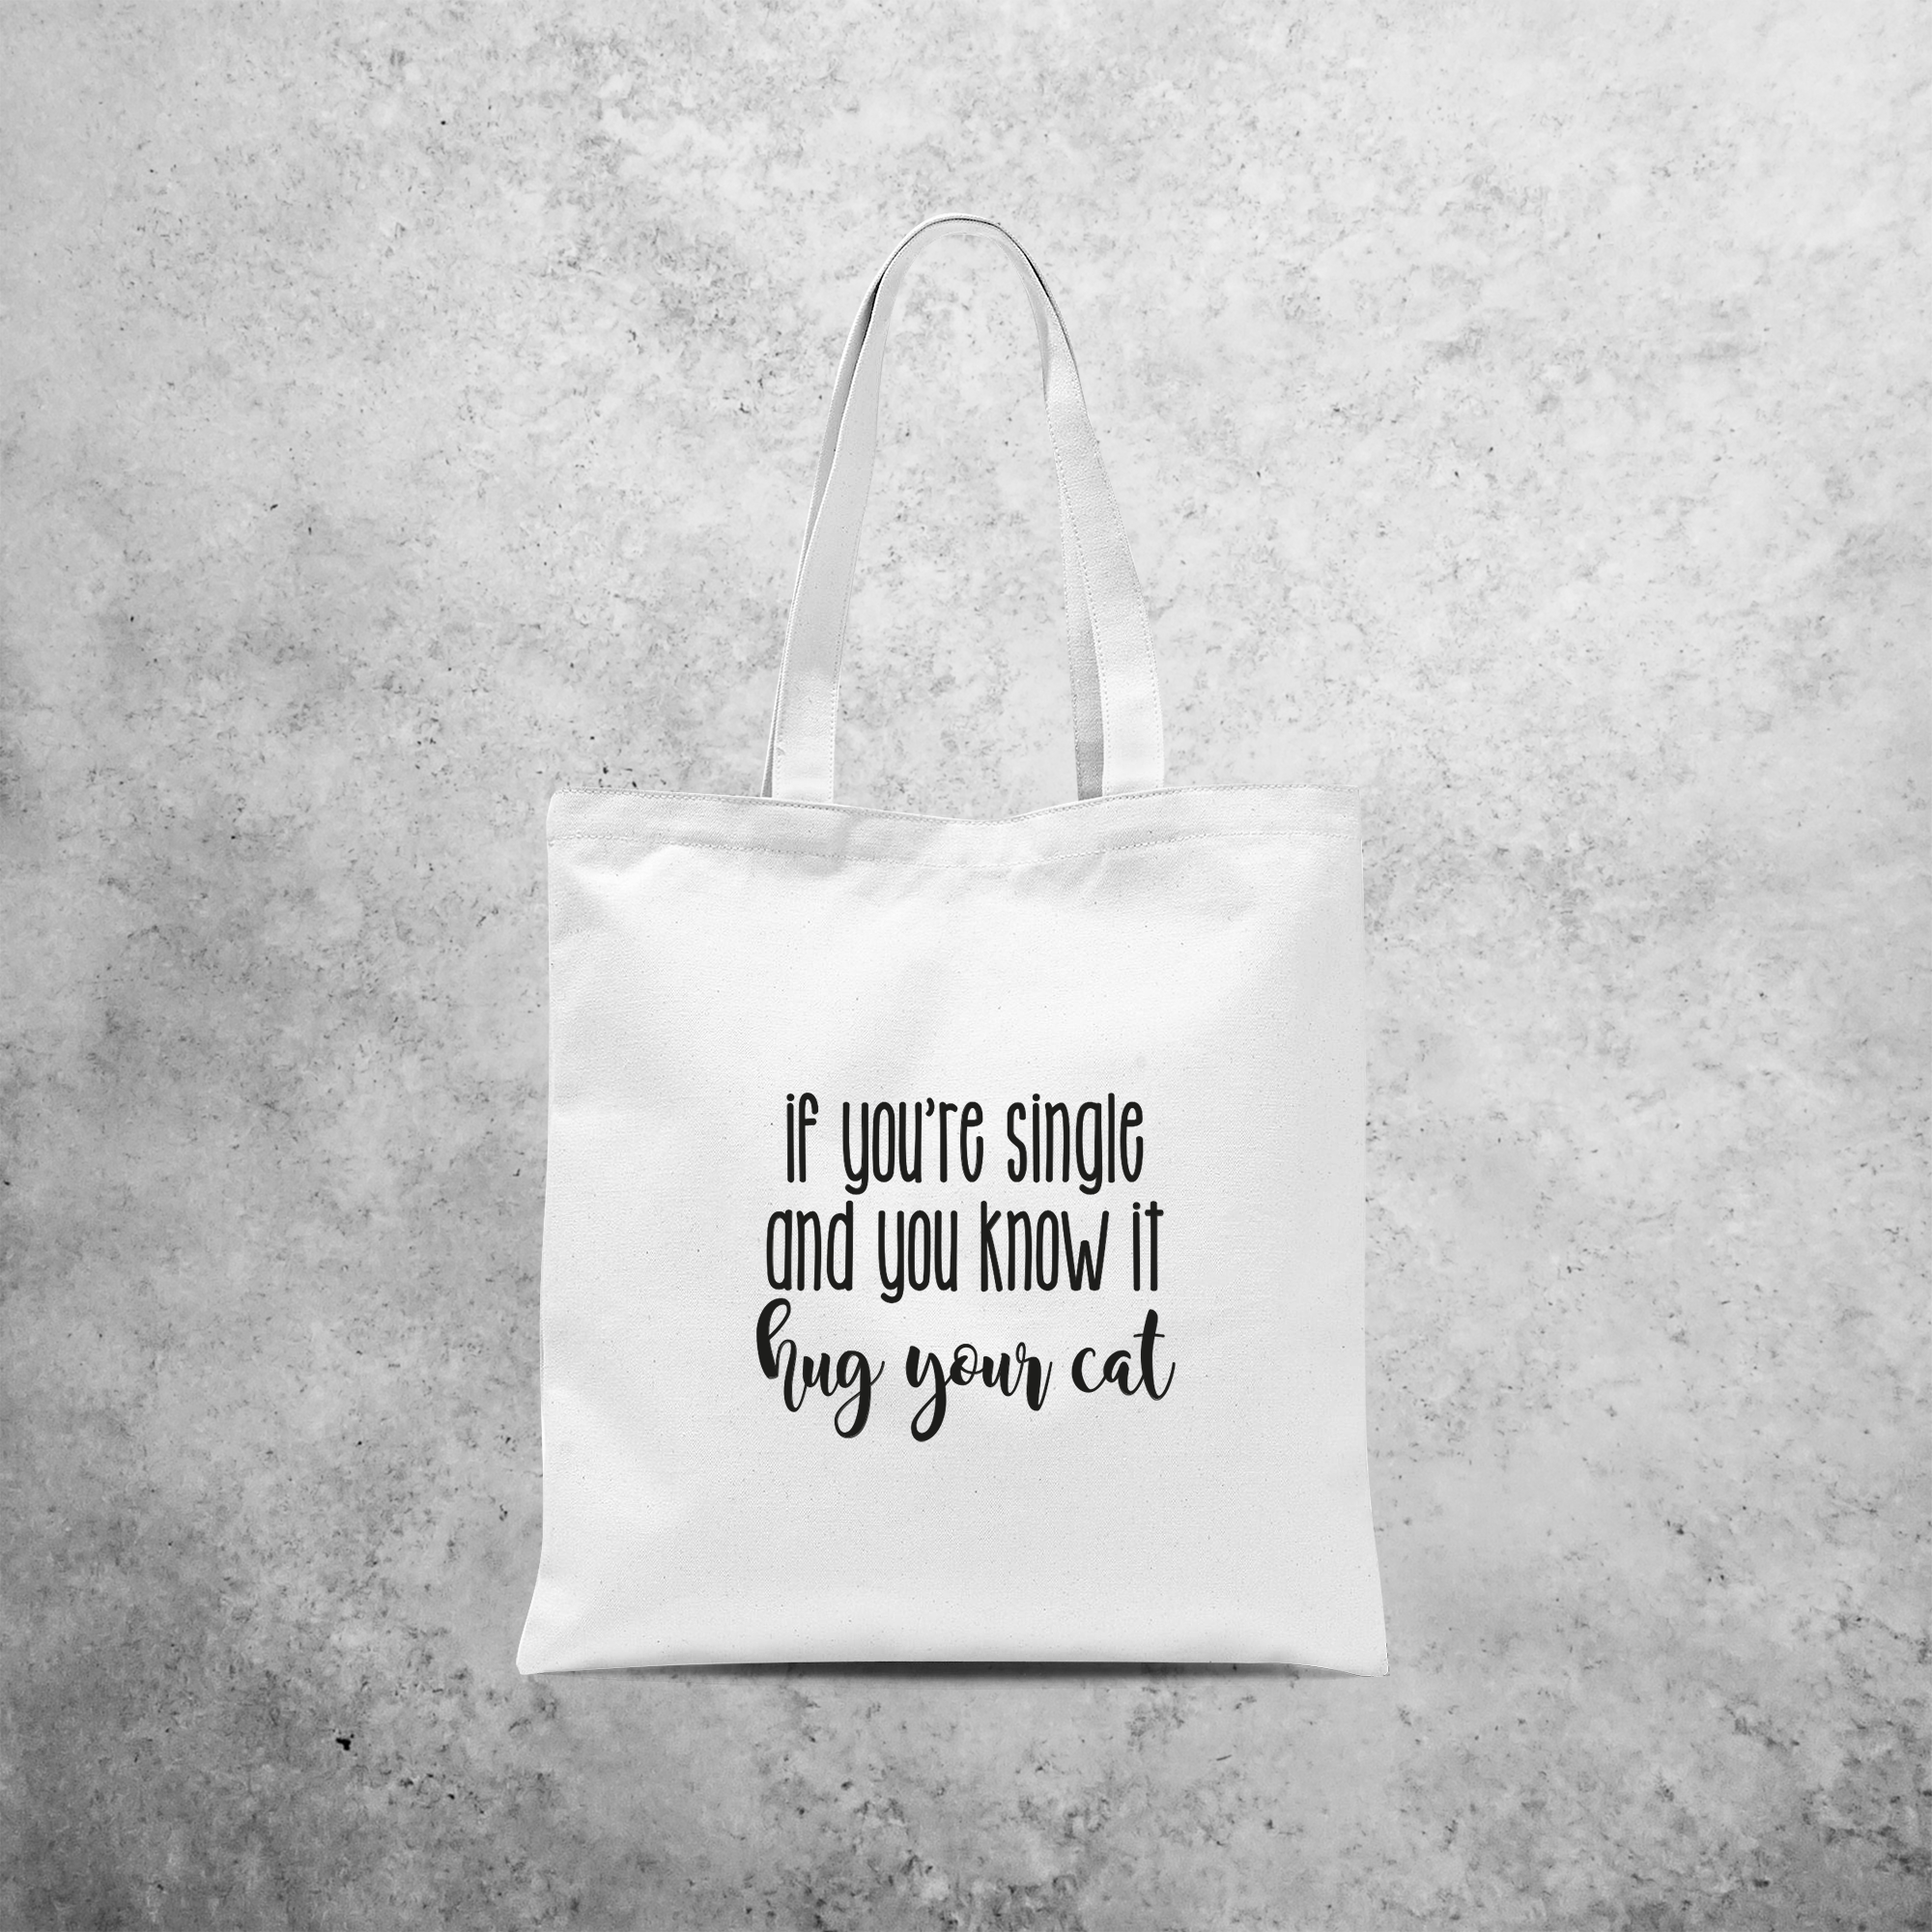 'If you're single and you know it, hug your cat' tote bag